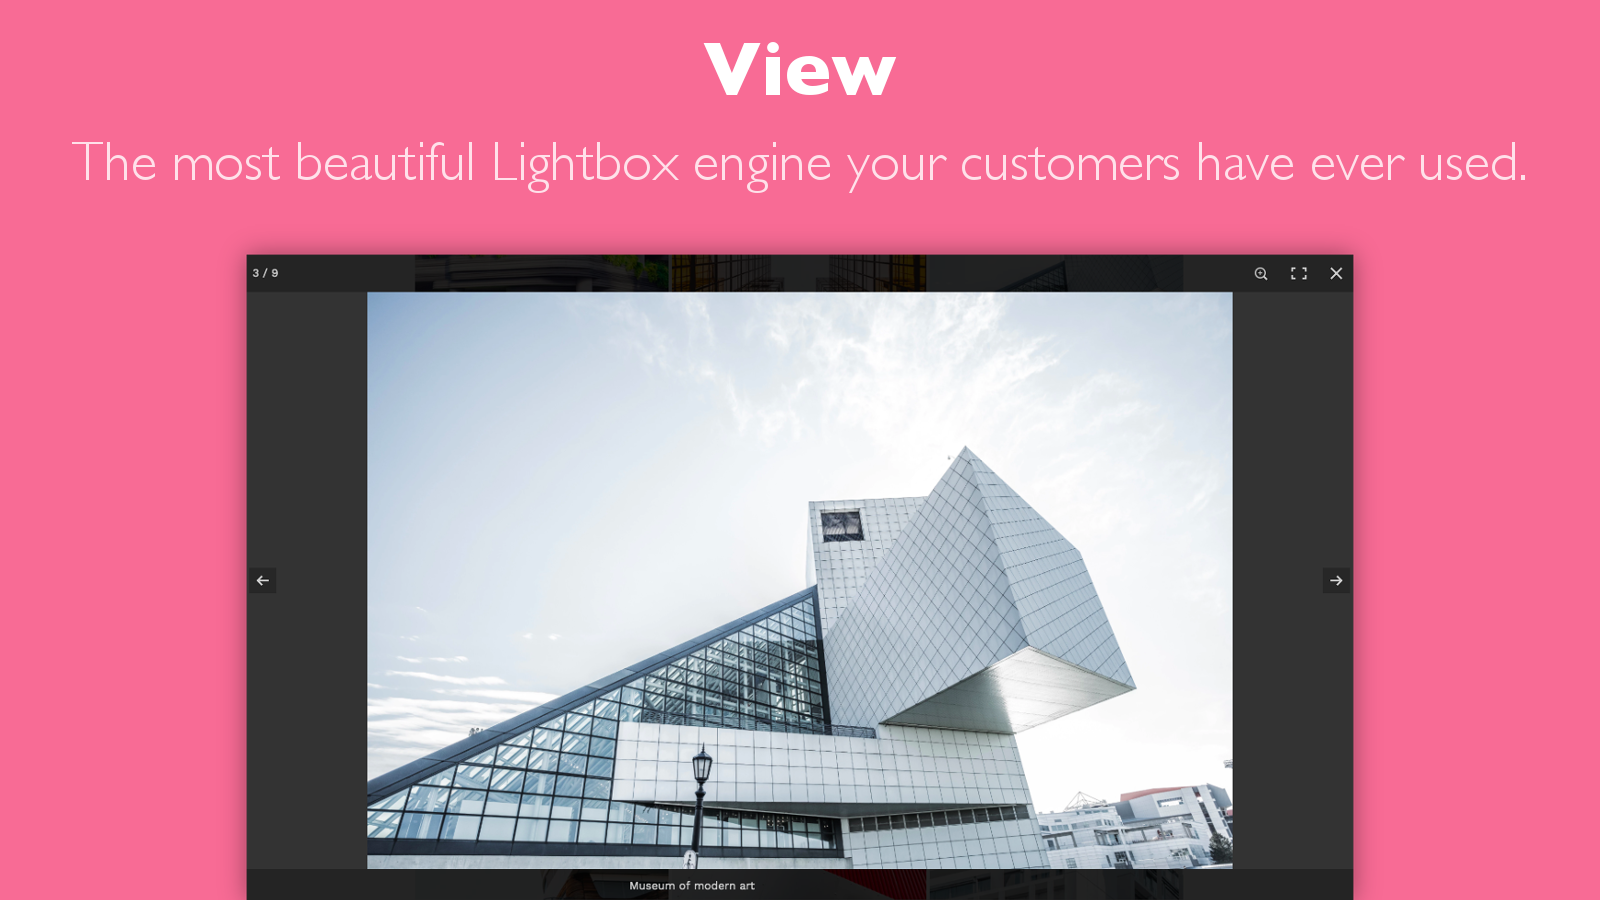 The most beautiful Lightbox engine your customers have seen.